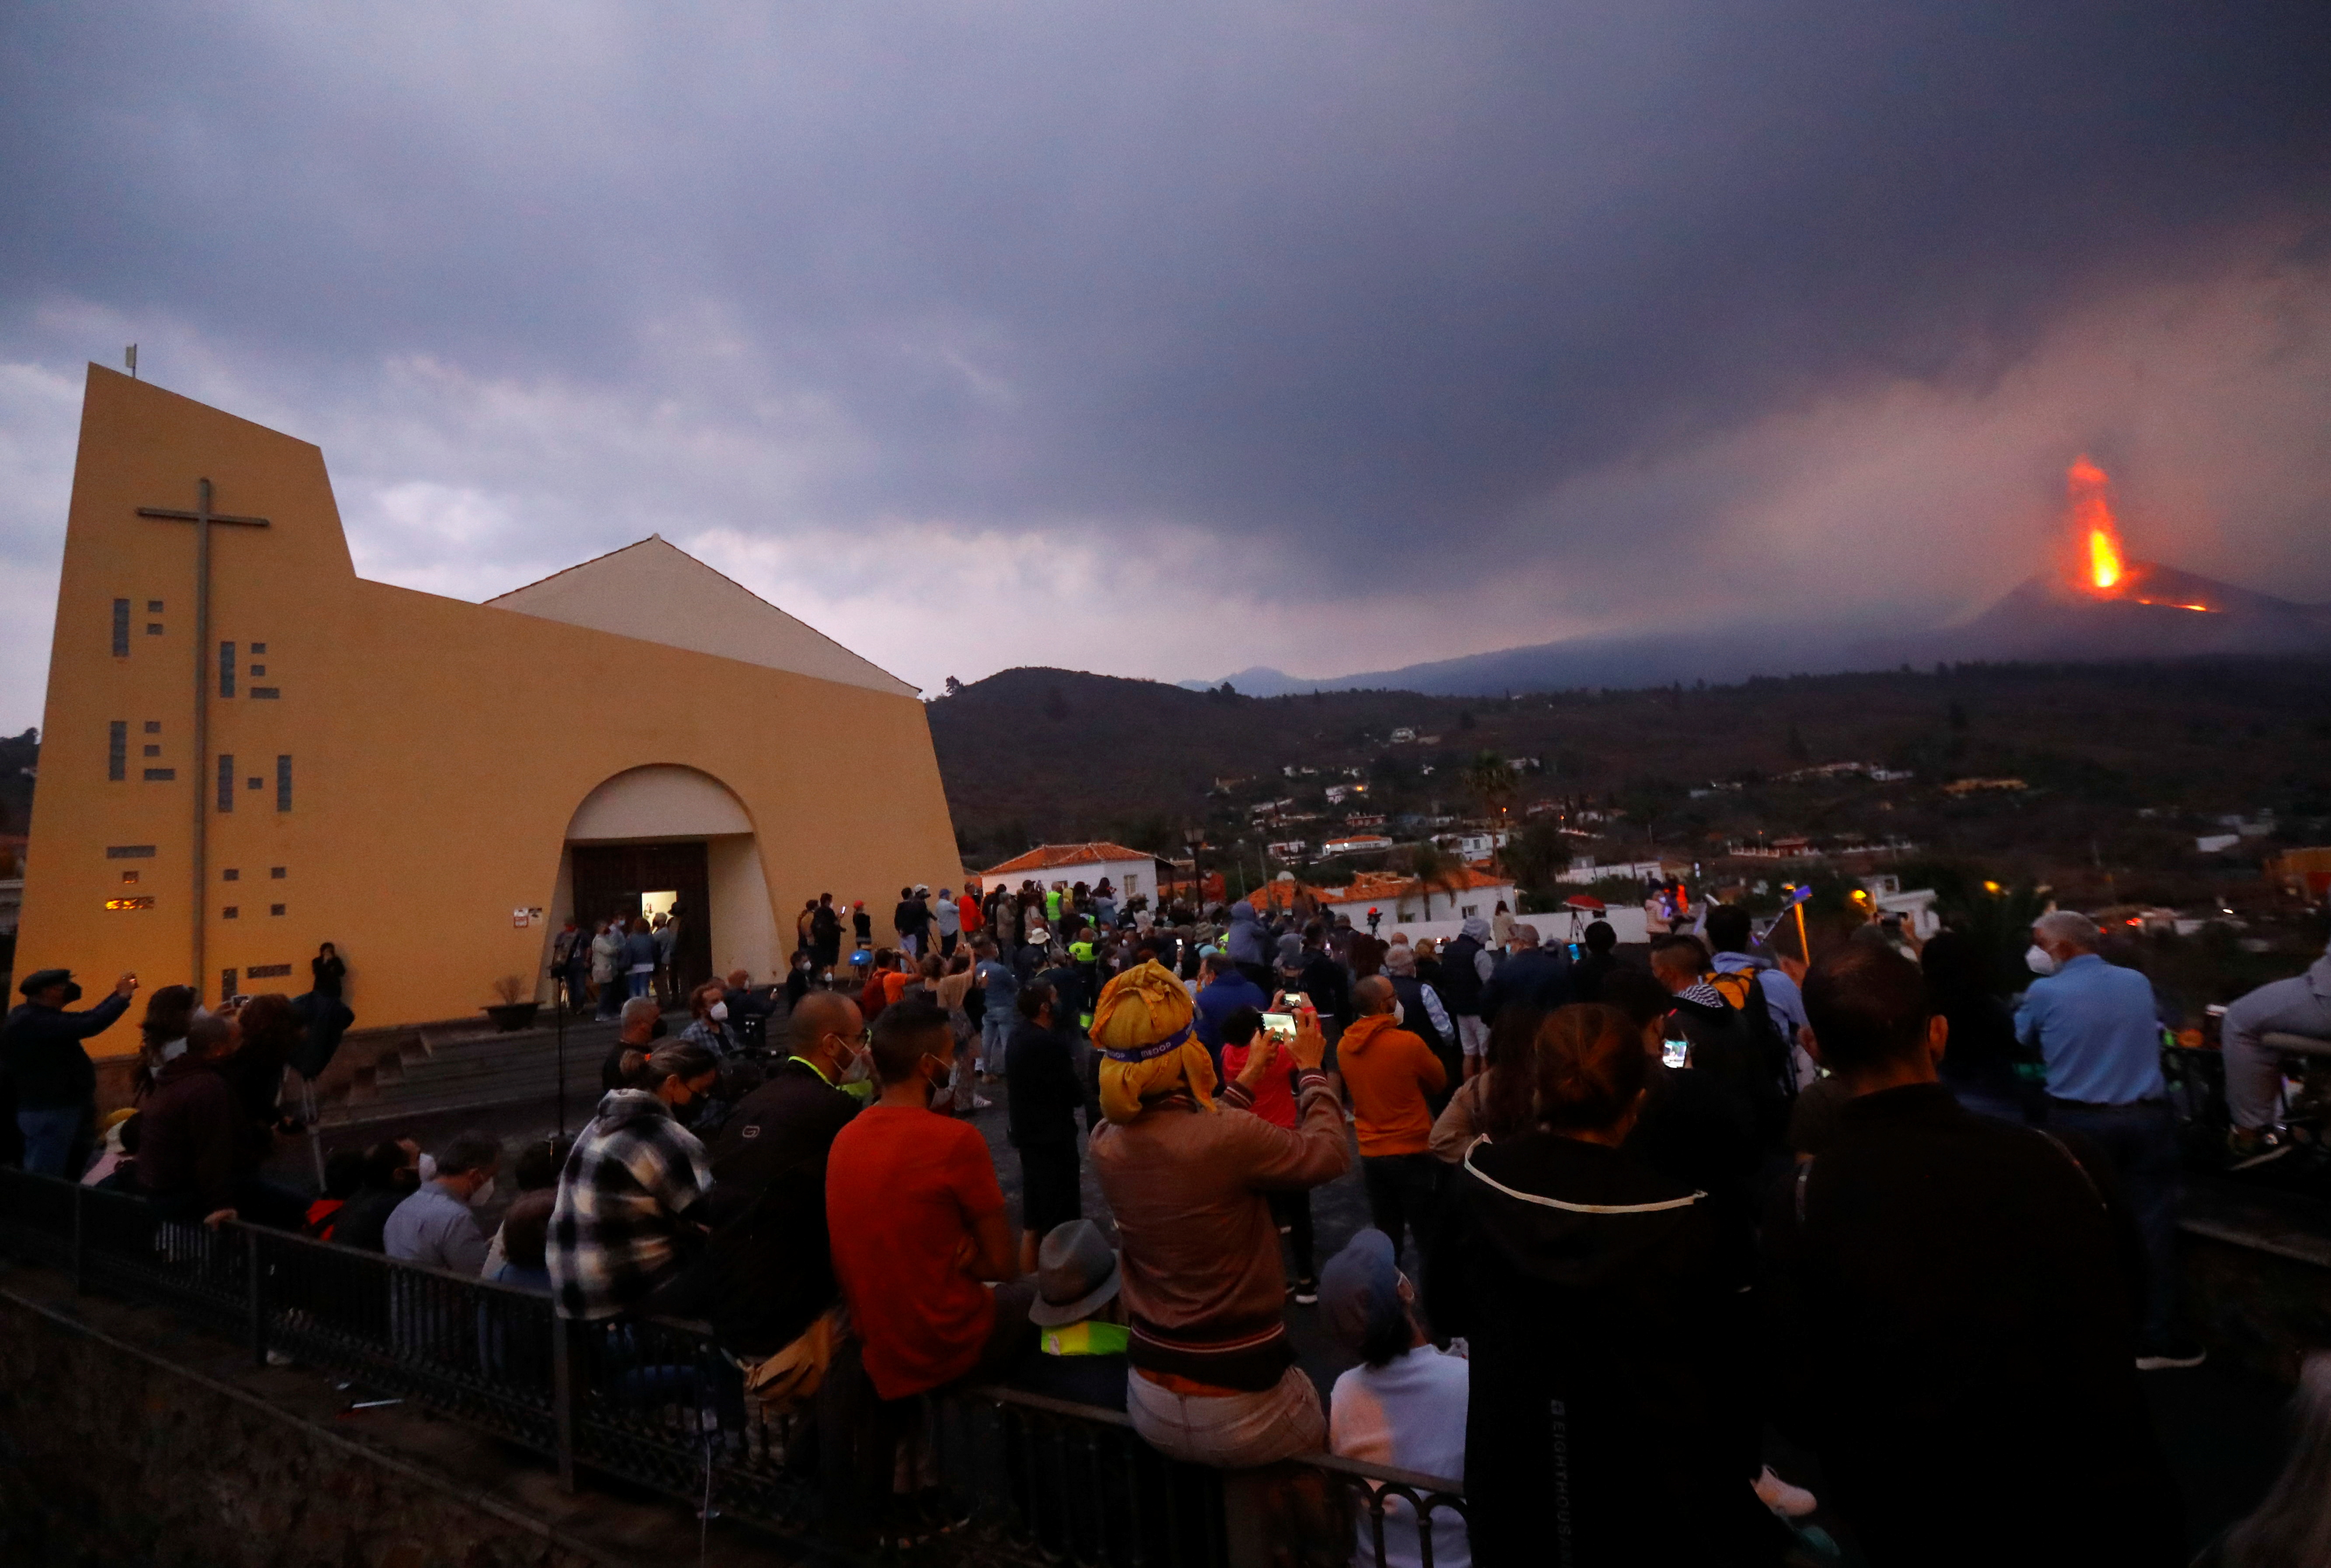 Tourists arrive at the Tajuya viewpoint to see the Cumbre Vieja volcano that continues to expel lava